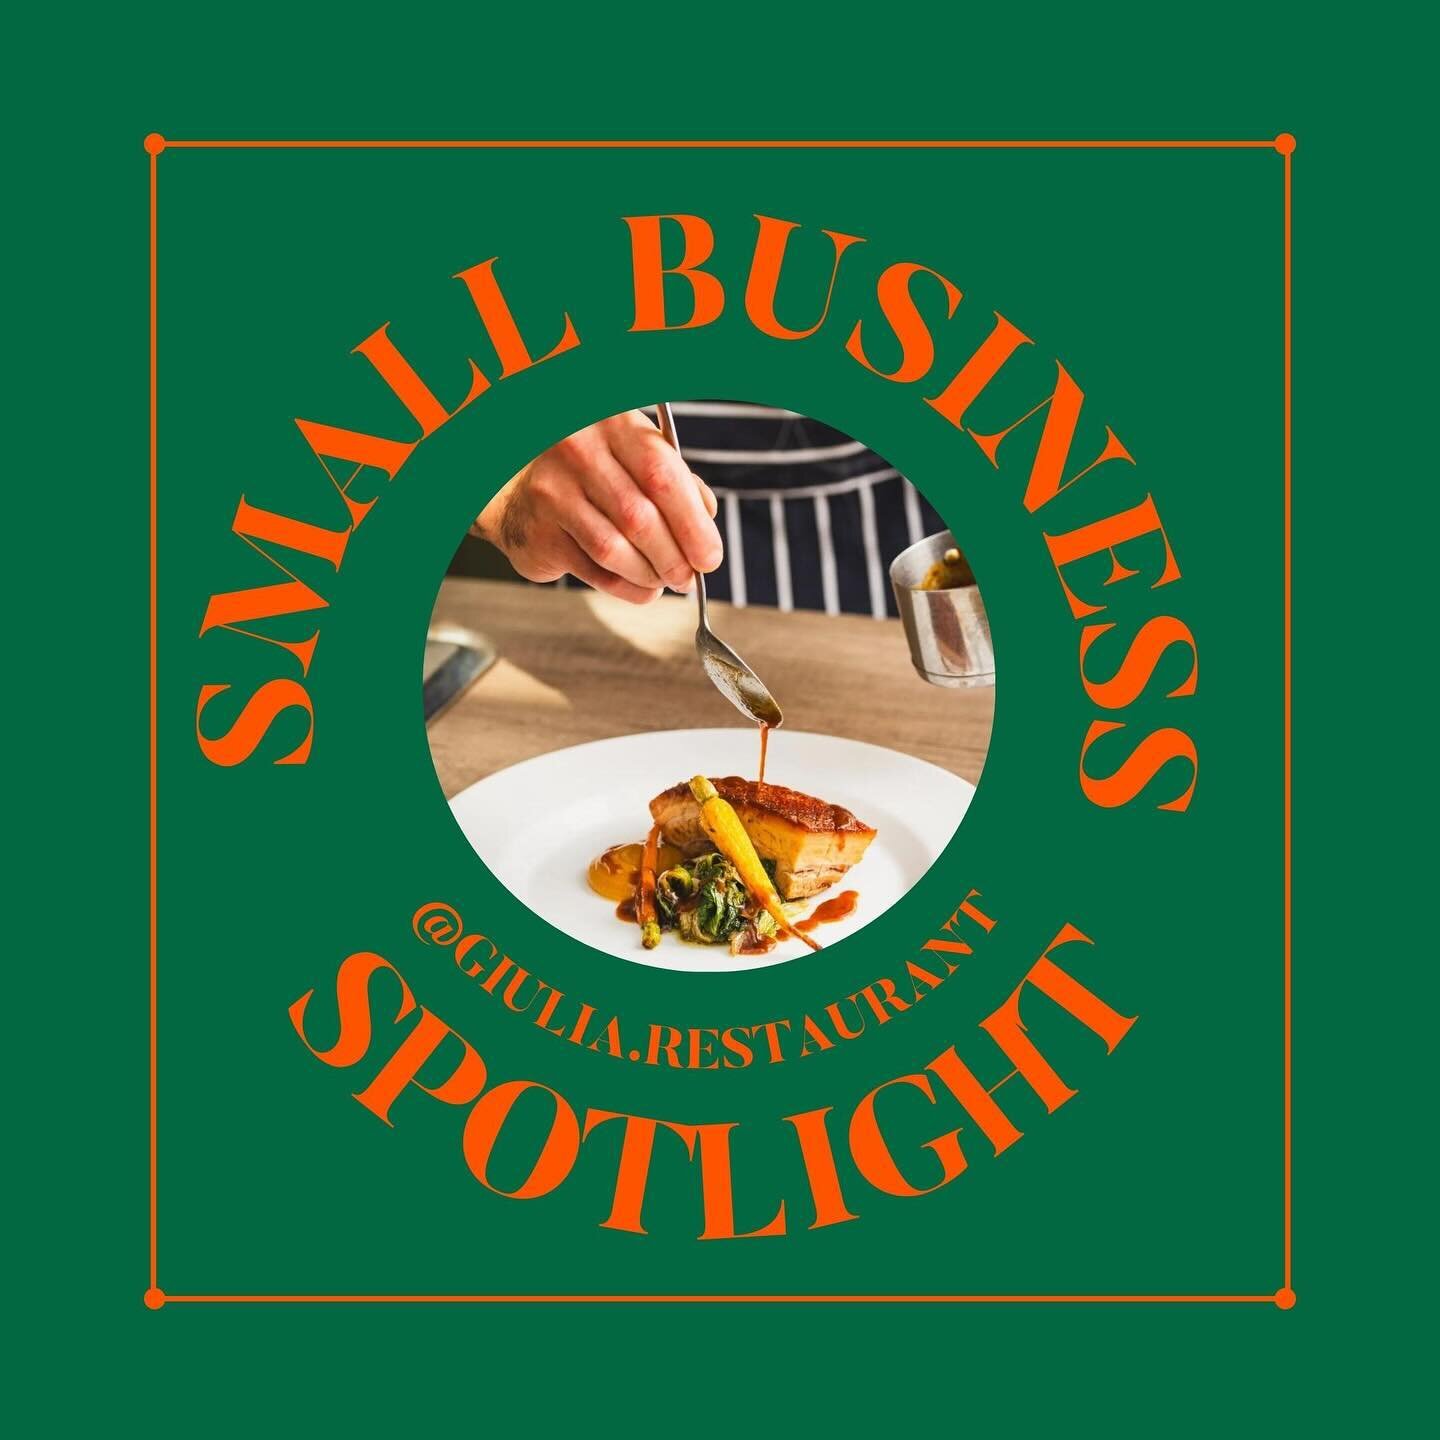 Todays Small Business Spotlight is @giulia.restaurant ! Swipe through the slides to find out more about them and their delicious food!

#neighbourhoodeventsw12 #westlondon #westlondonliving #supportsmallbusiness #smallbusinessbigimpact #allthingsaske